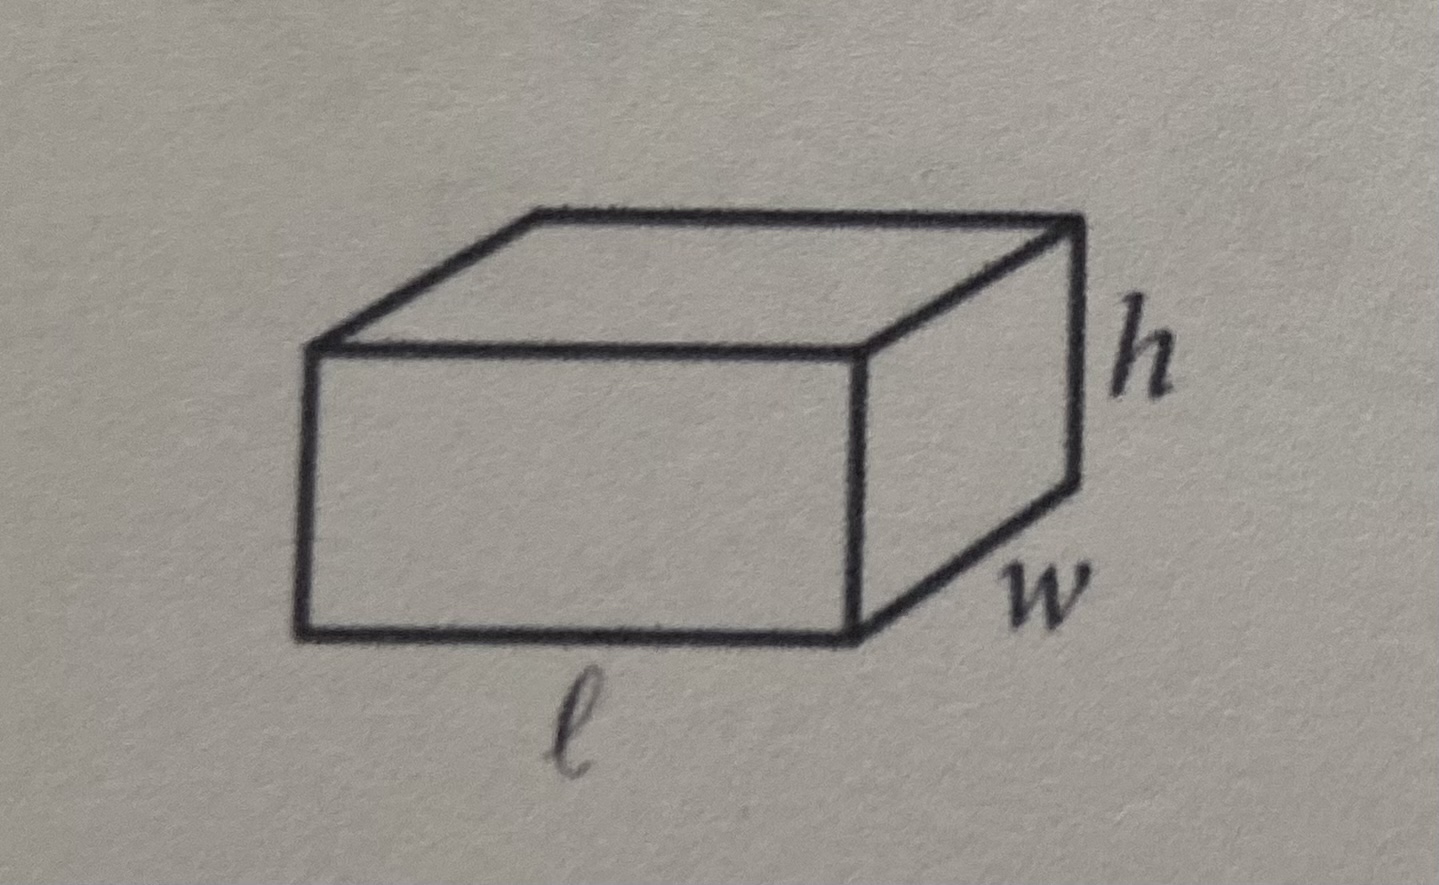 <p>How do you find the volume of the box? (or 3 dimensional square)</p>